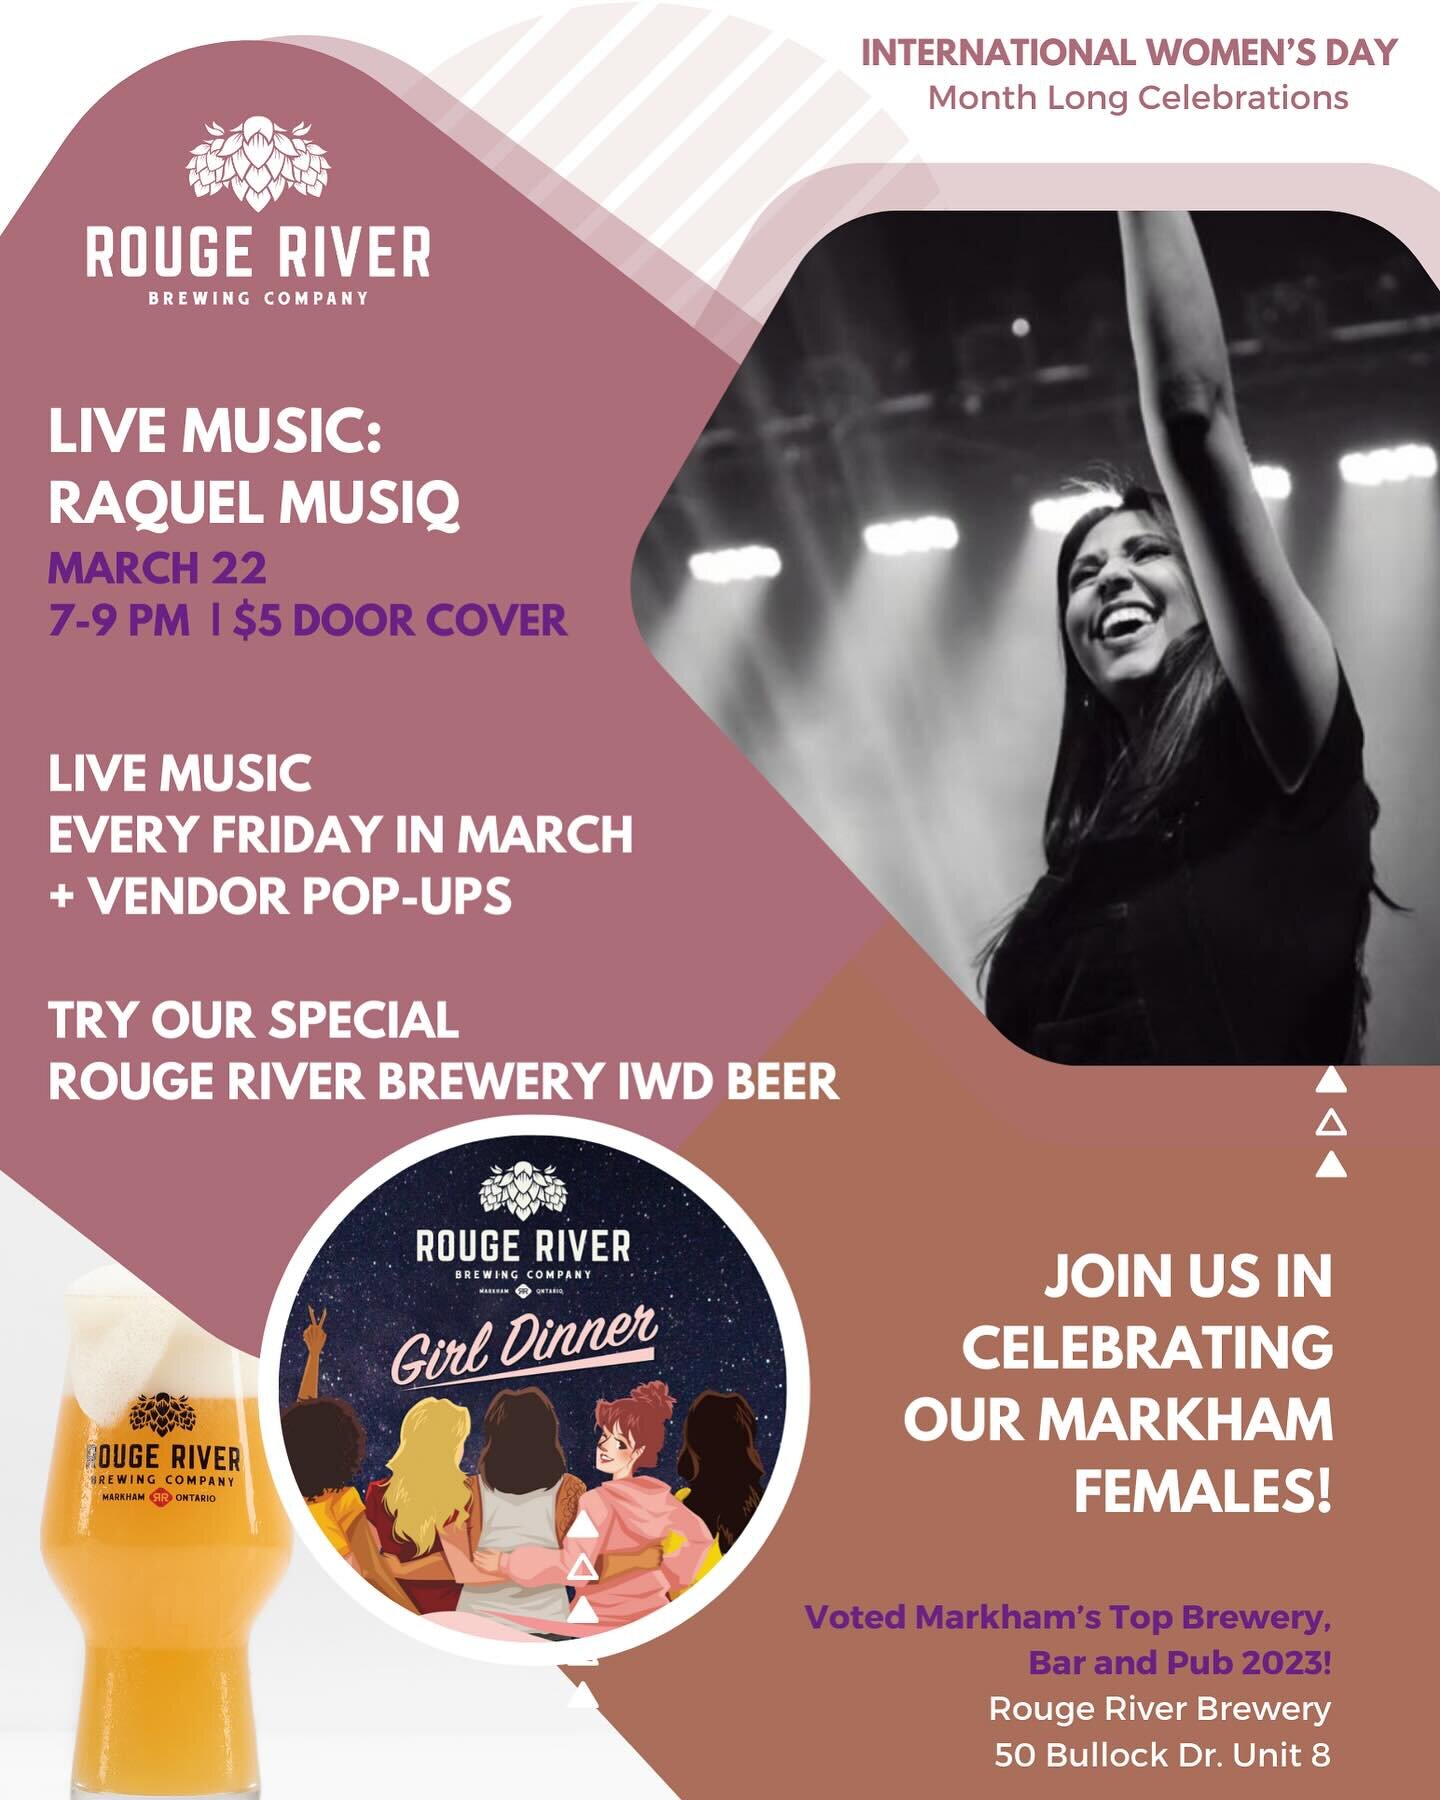 Live Music Friday 7-9pm!

We continue to celebrate International Women&rsquo;s Day all month long this Friday with Raquel.&nbsp;

$5 door cover goes toward artist.&nbsp;

Vendor Pop-ups: triple baked and cyclebar Markham 5-9pm

Try our special Girl G